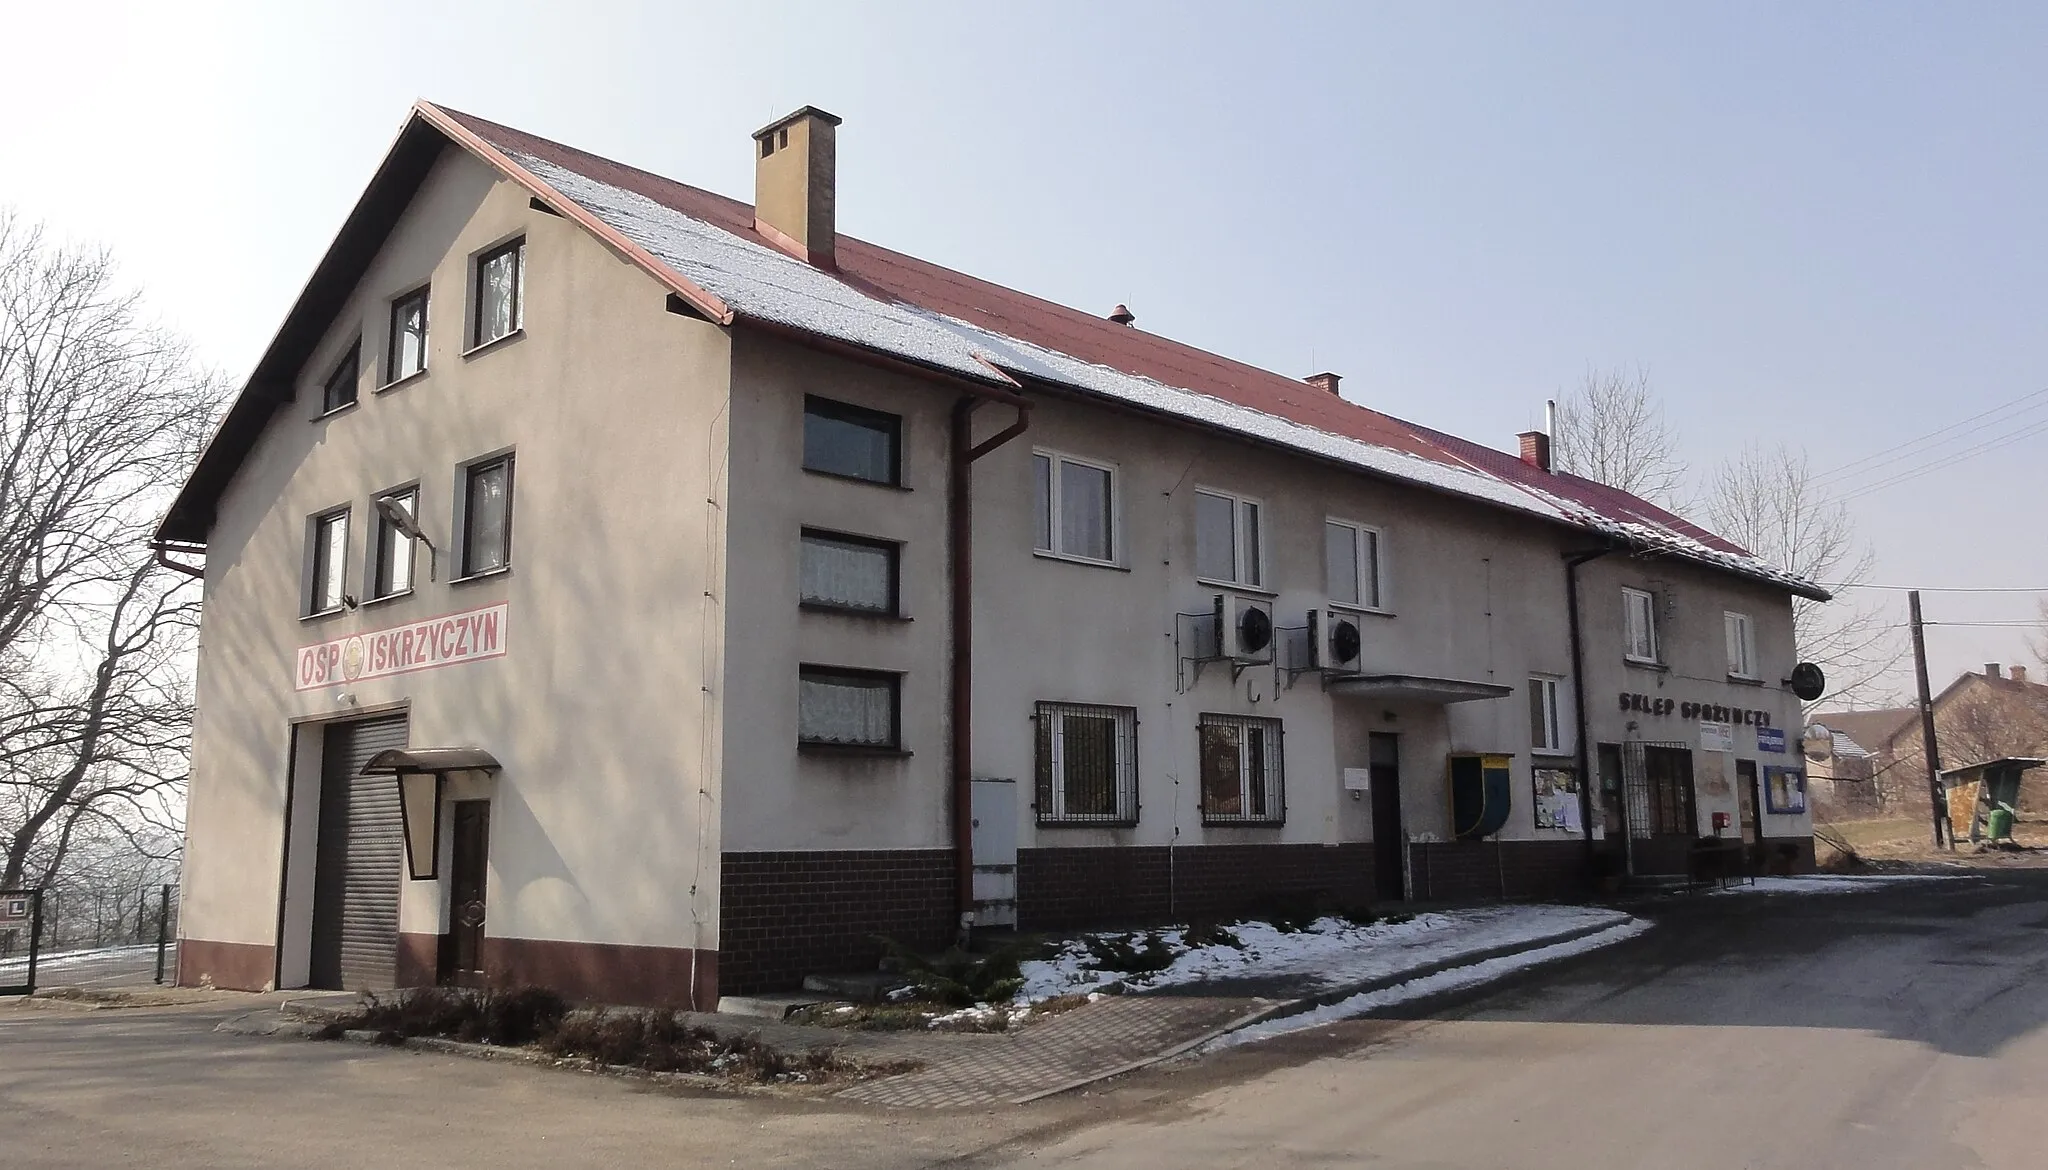 Photo showing: Fire station in Iskrzyczyn